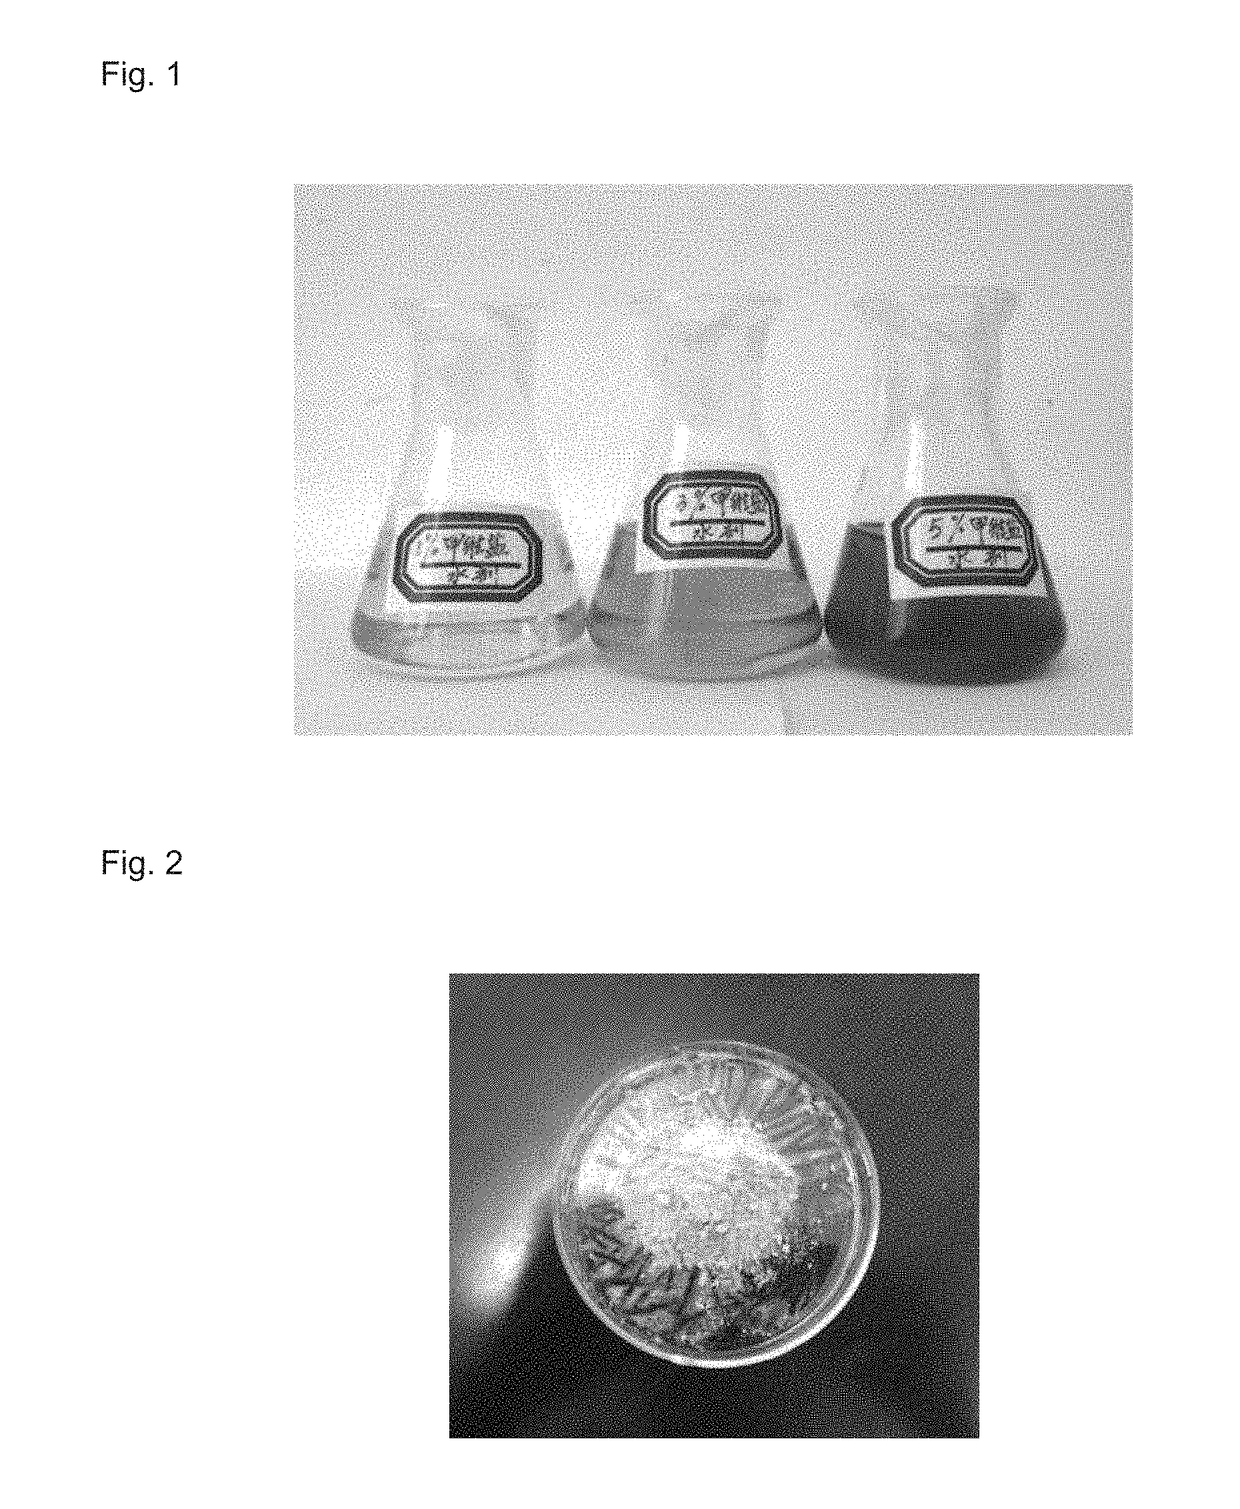 Environmentally-friendly emamectin benzoate preparation and preparation method therefor